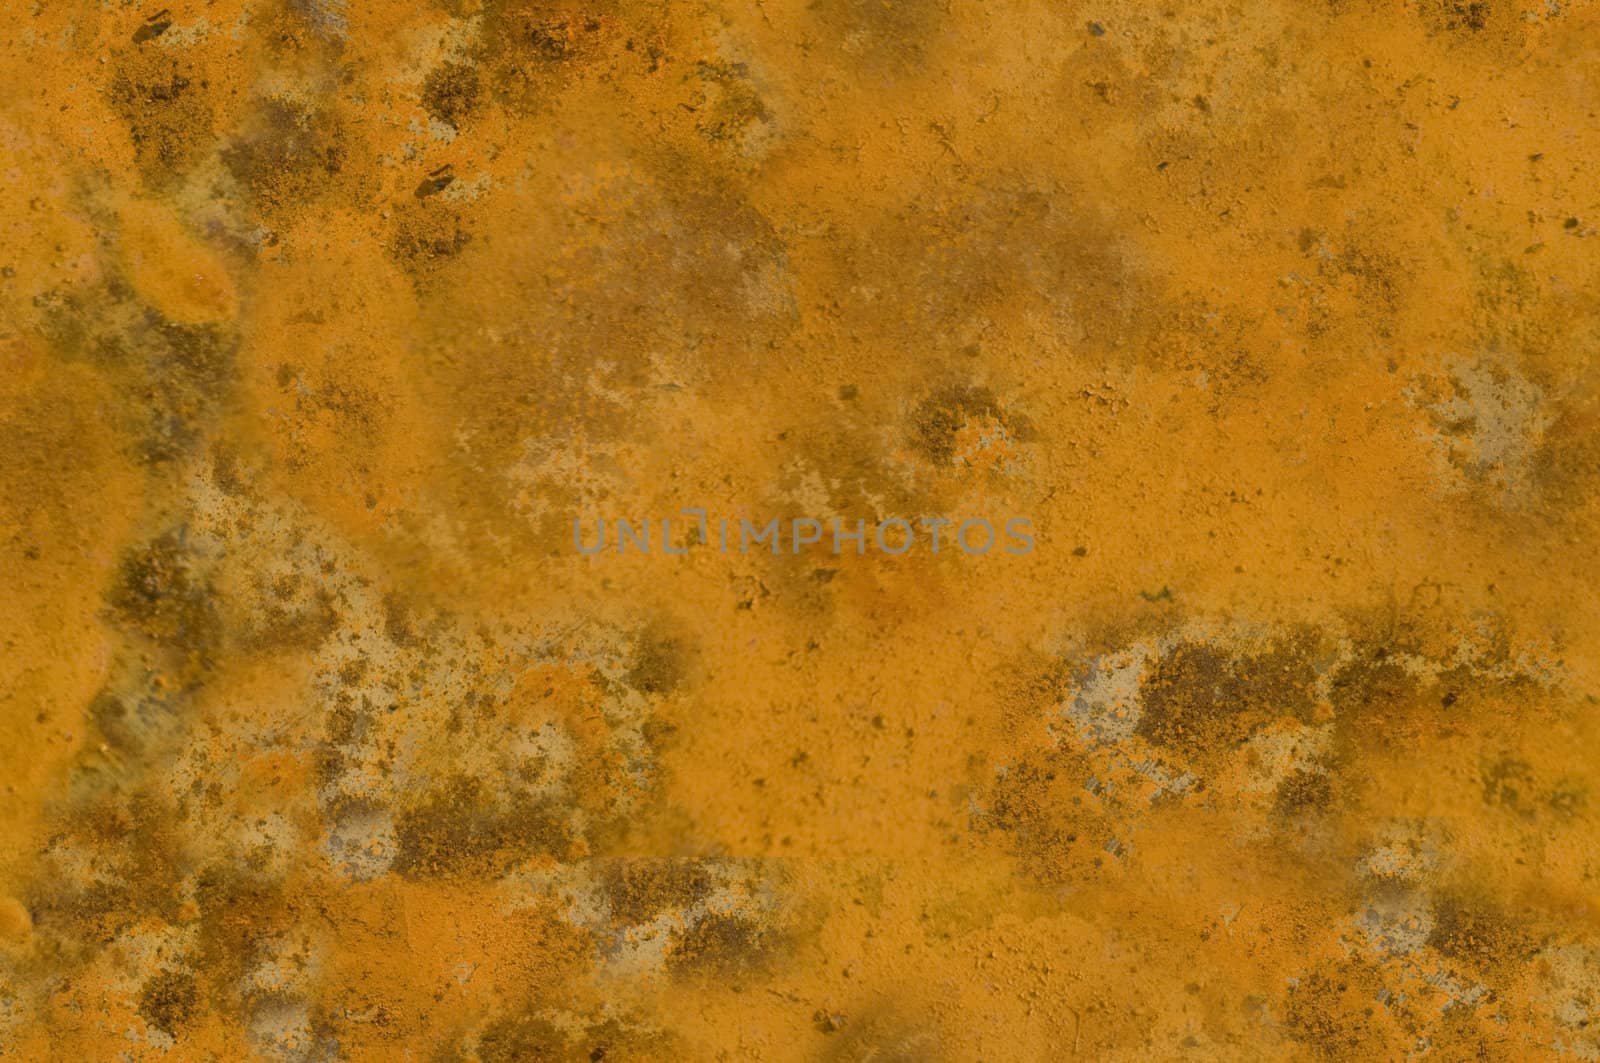 Rusty grungy seamless background texture by Balefire9